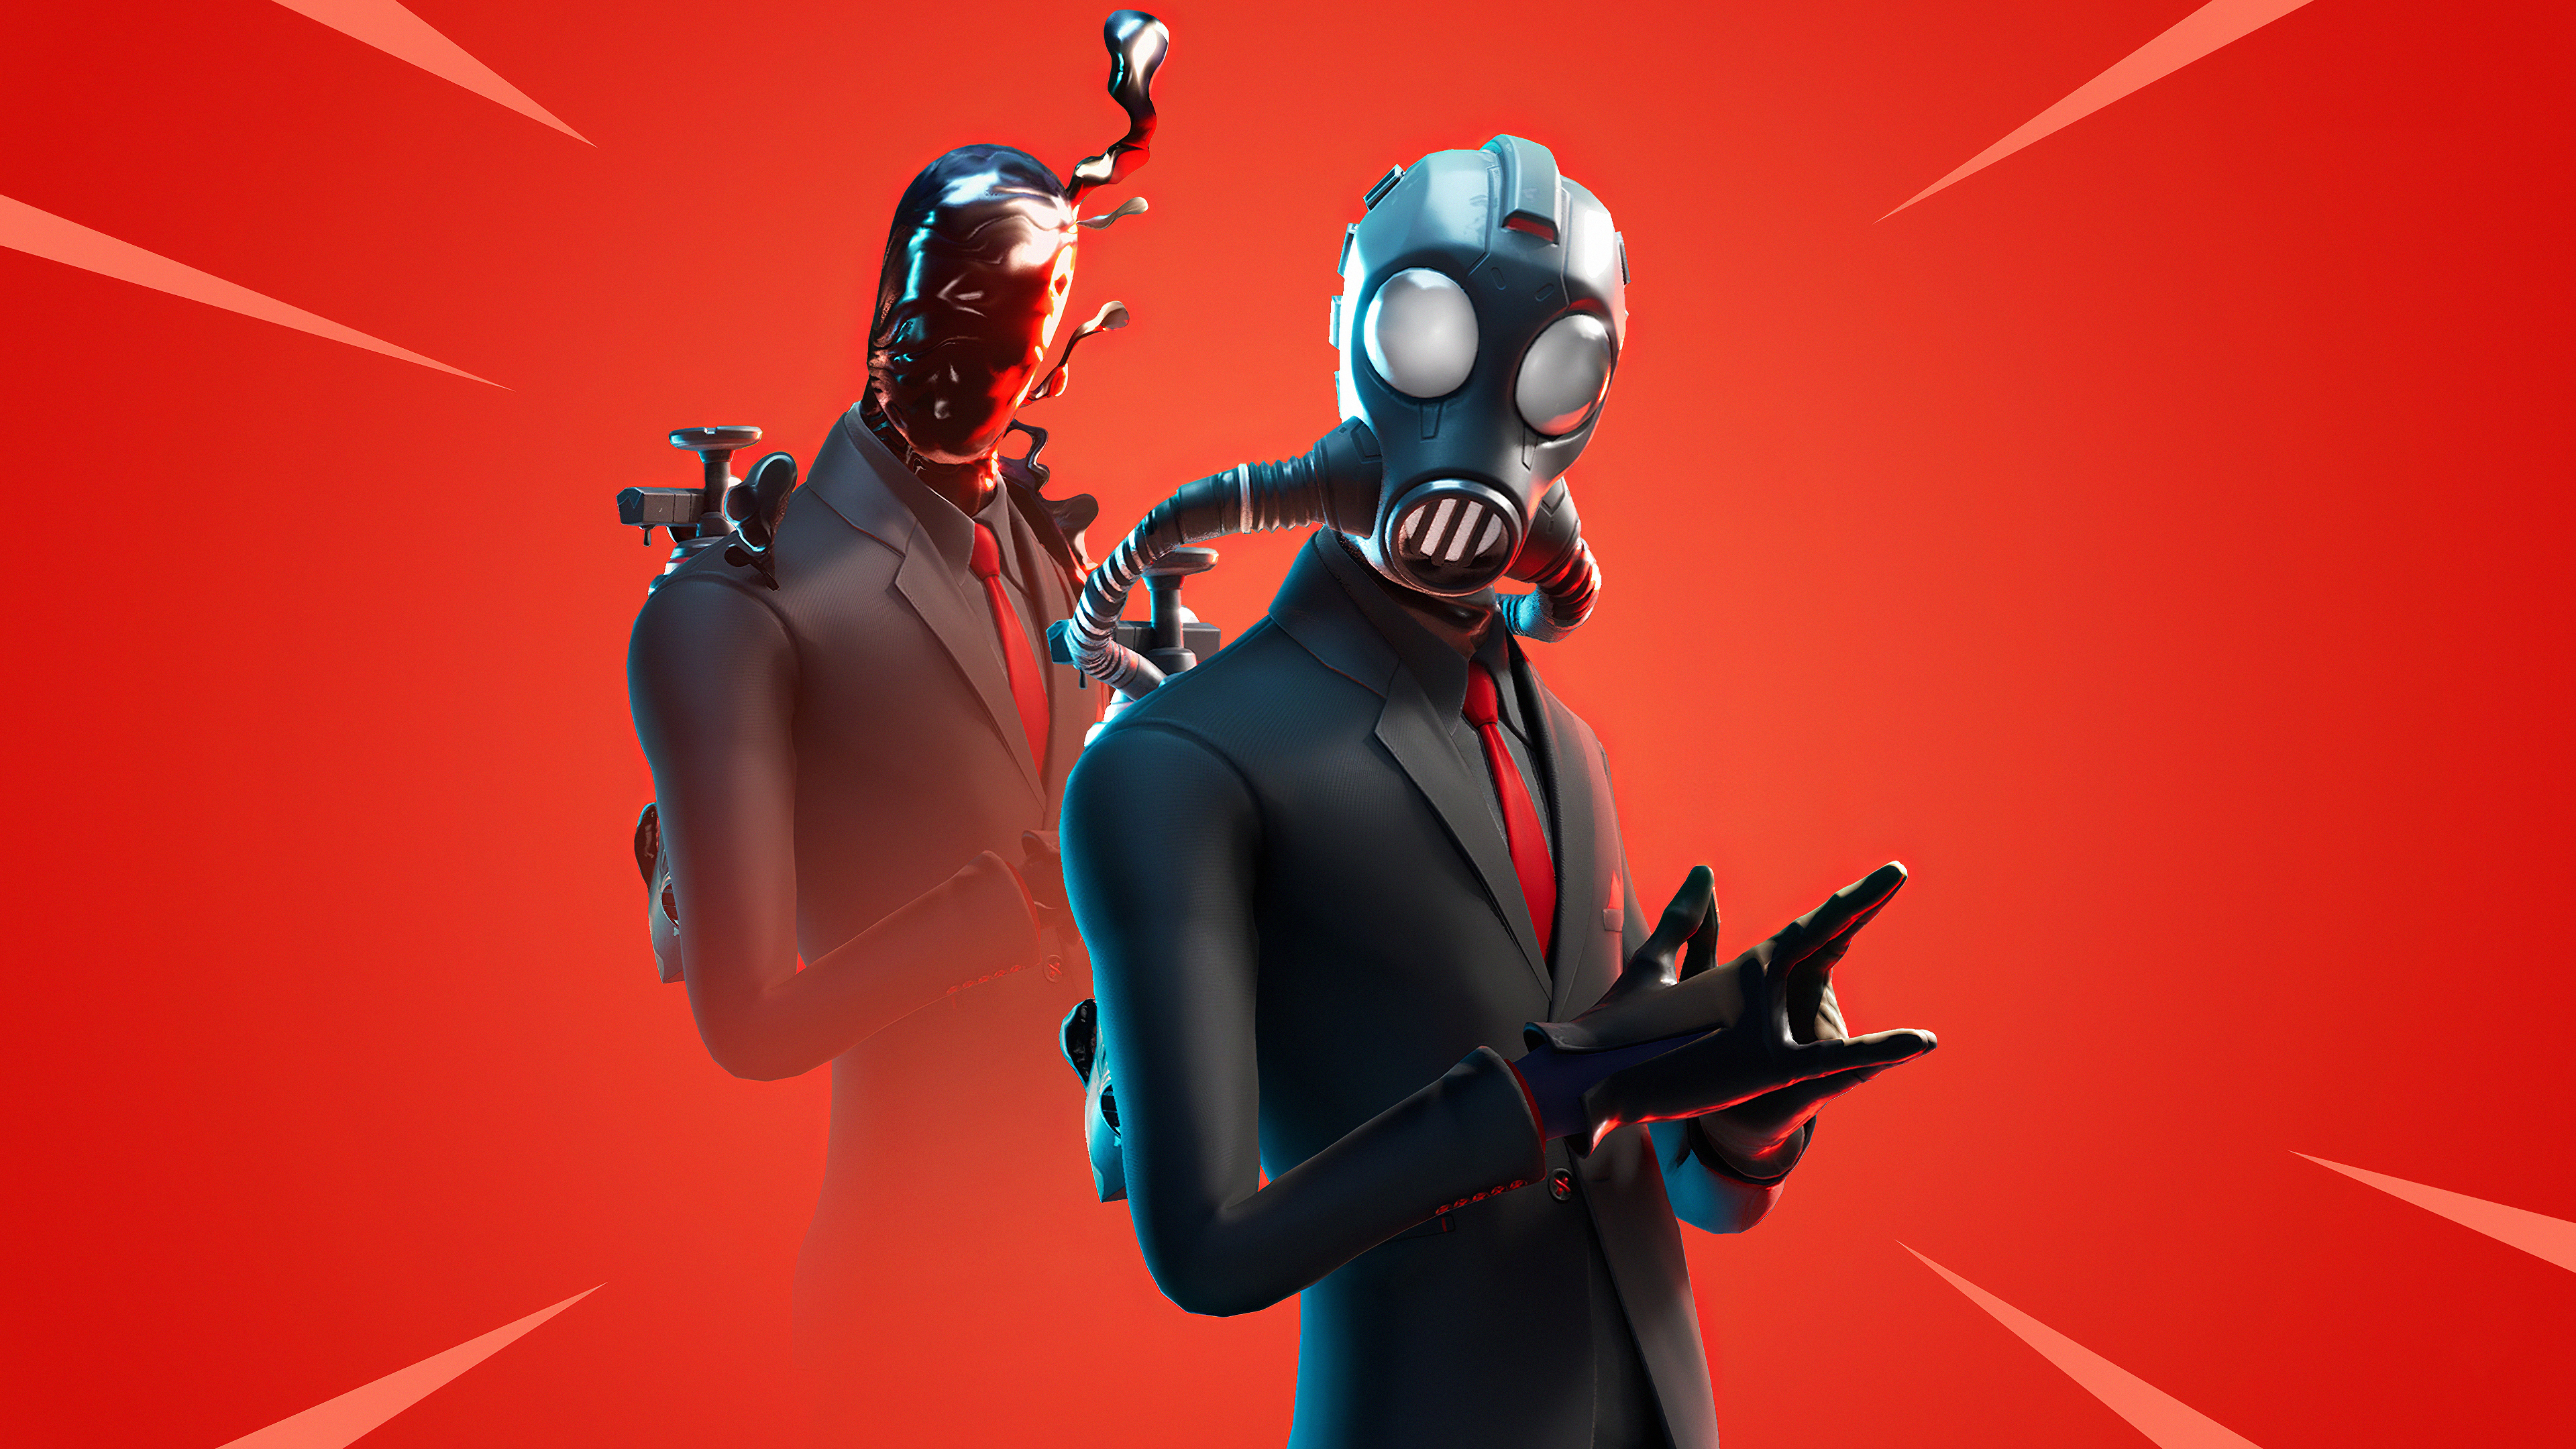 Chaos Agent Fortnite 4k Wallpaper Hd Games 4k Wallpapers Images